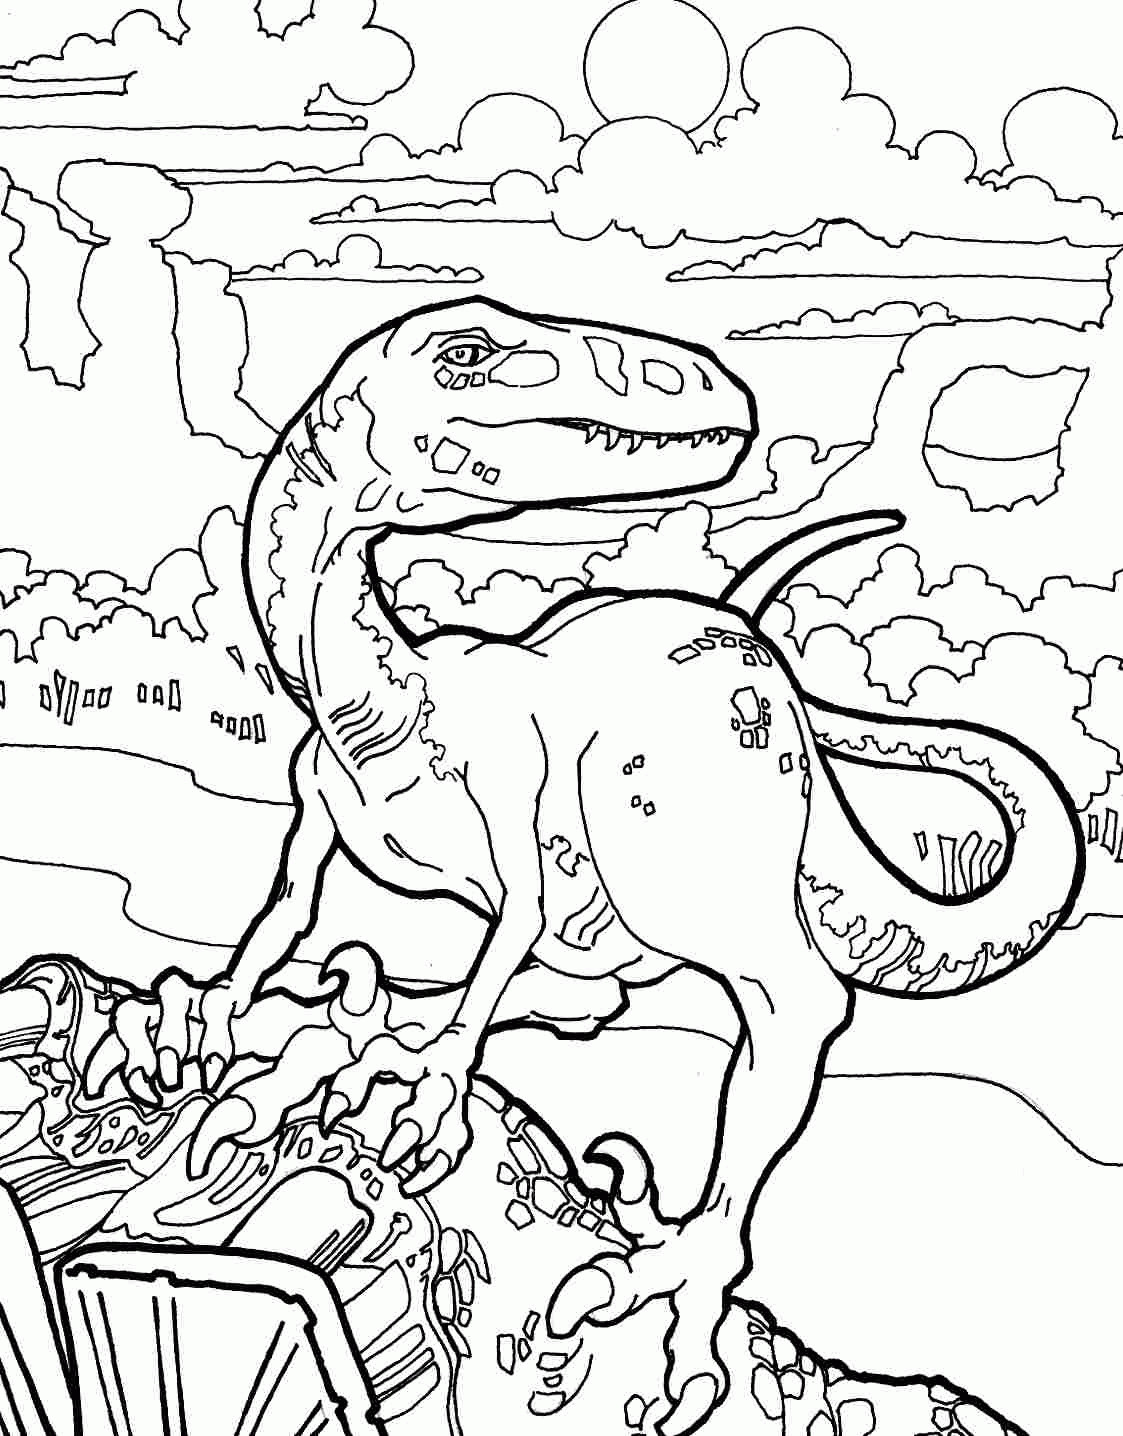 Dinosaur Coloring Pages For Adults
 Velociraptor Coloring Pages Best Coloring Pages For Kids